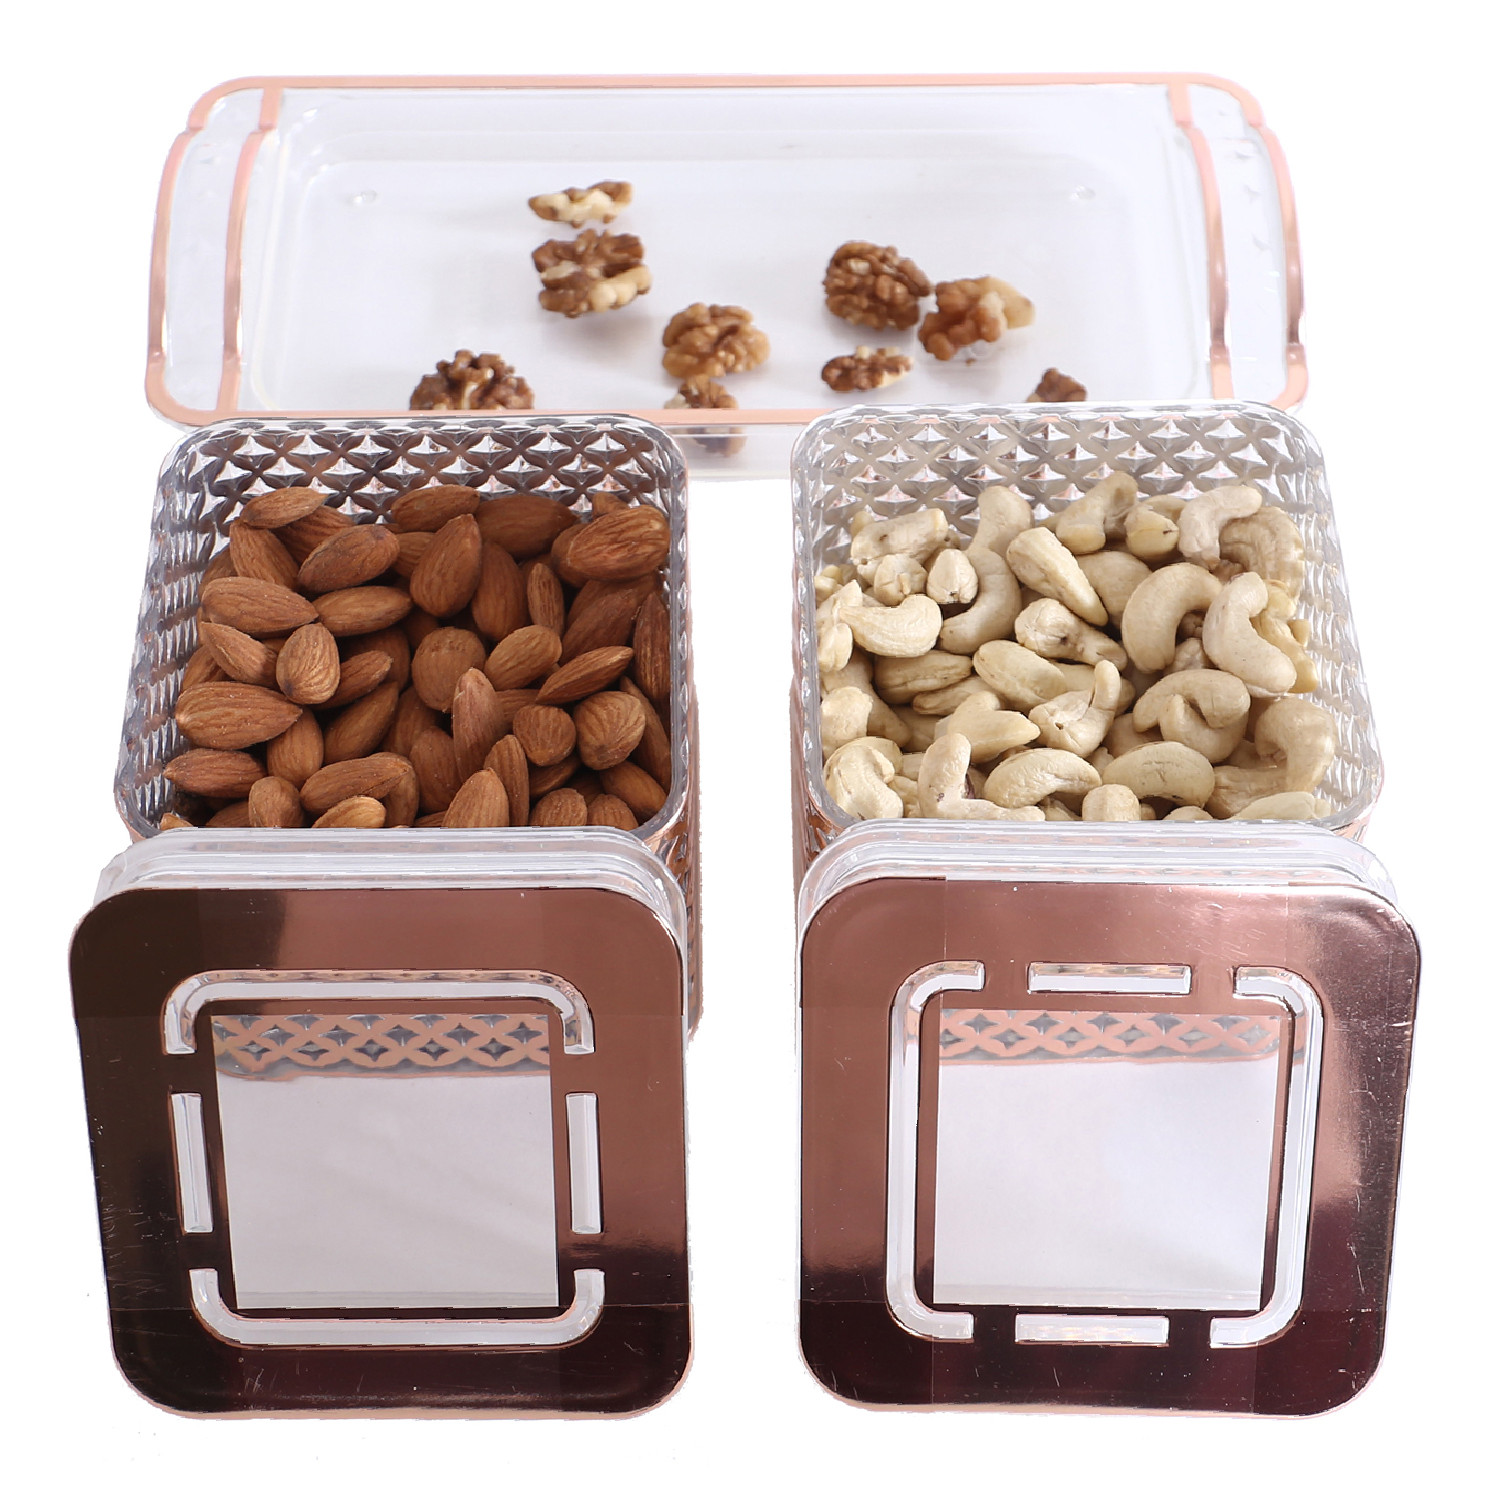 Kuber Industries 2 Containers & Tray Set|Unbreakable Plastic Snackers,Cookies,Nuts Serving Tray|Airtight Containers with Lid,400 ml (Peach)